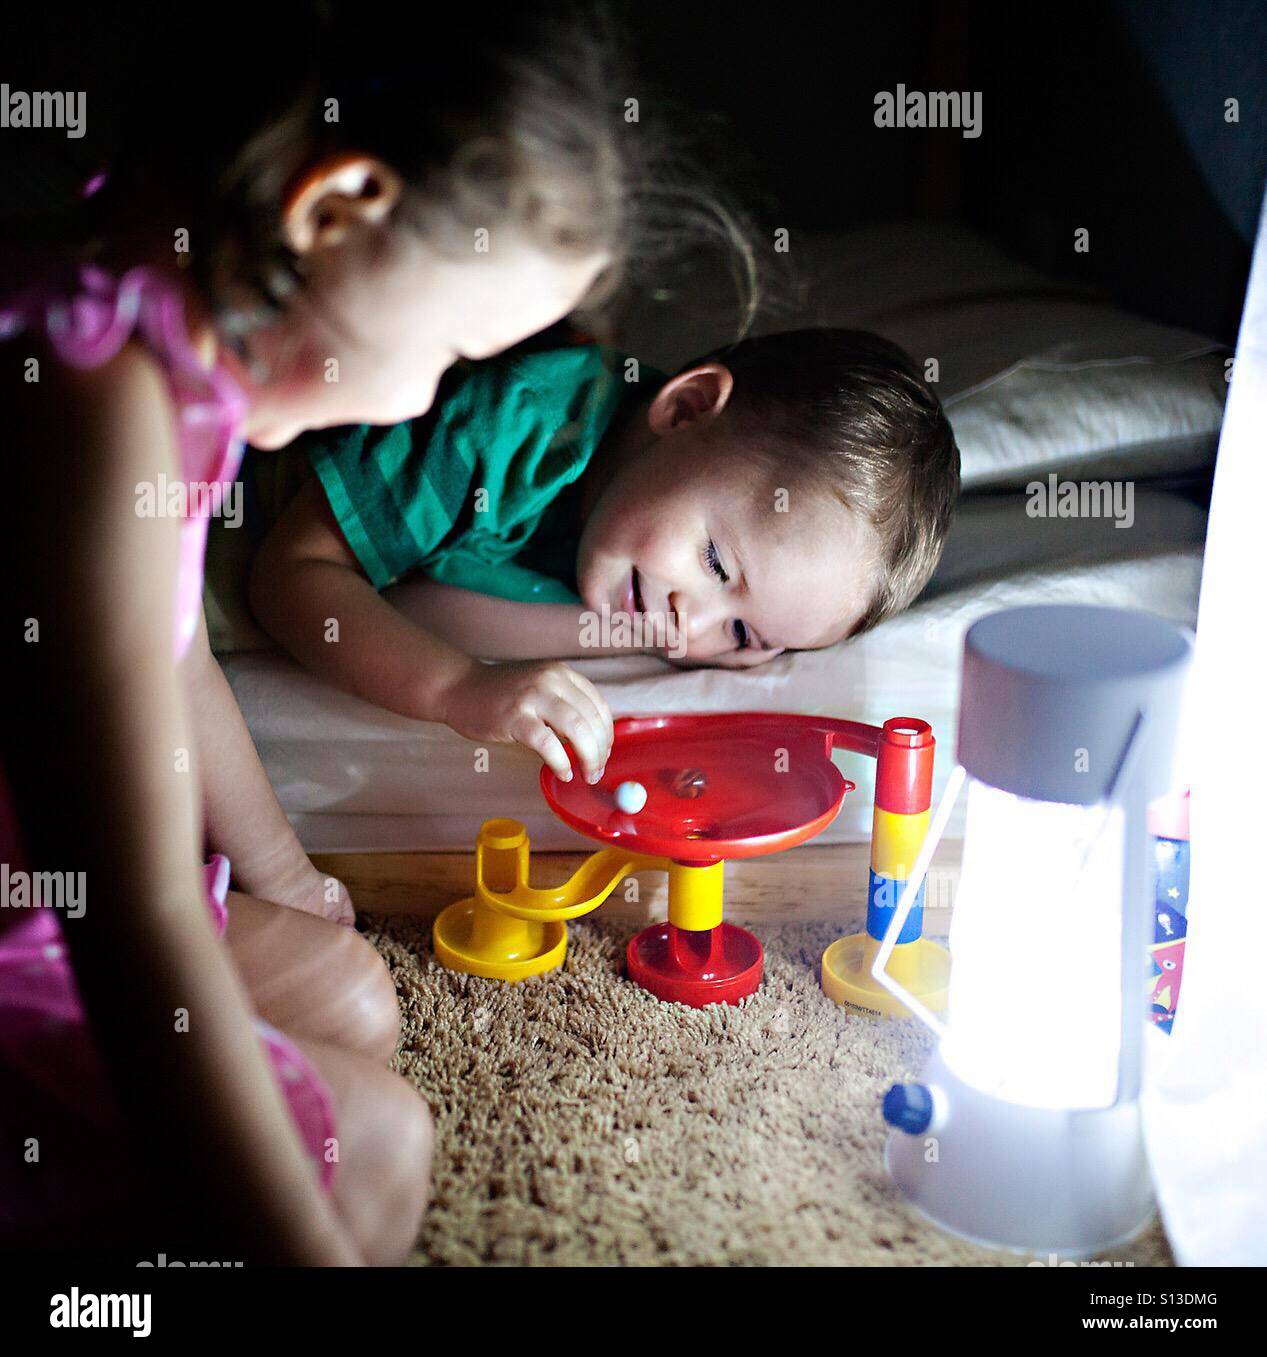 Toddler and your girl play with a marble run toy at bedtime by lamp light Stock Photo